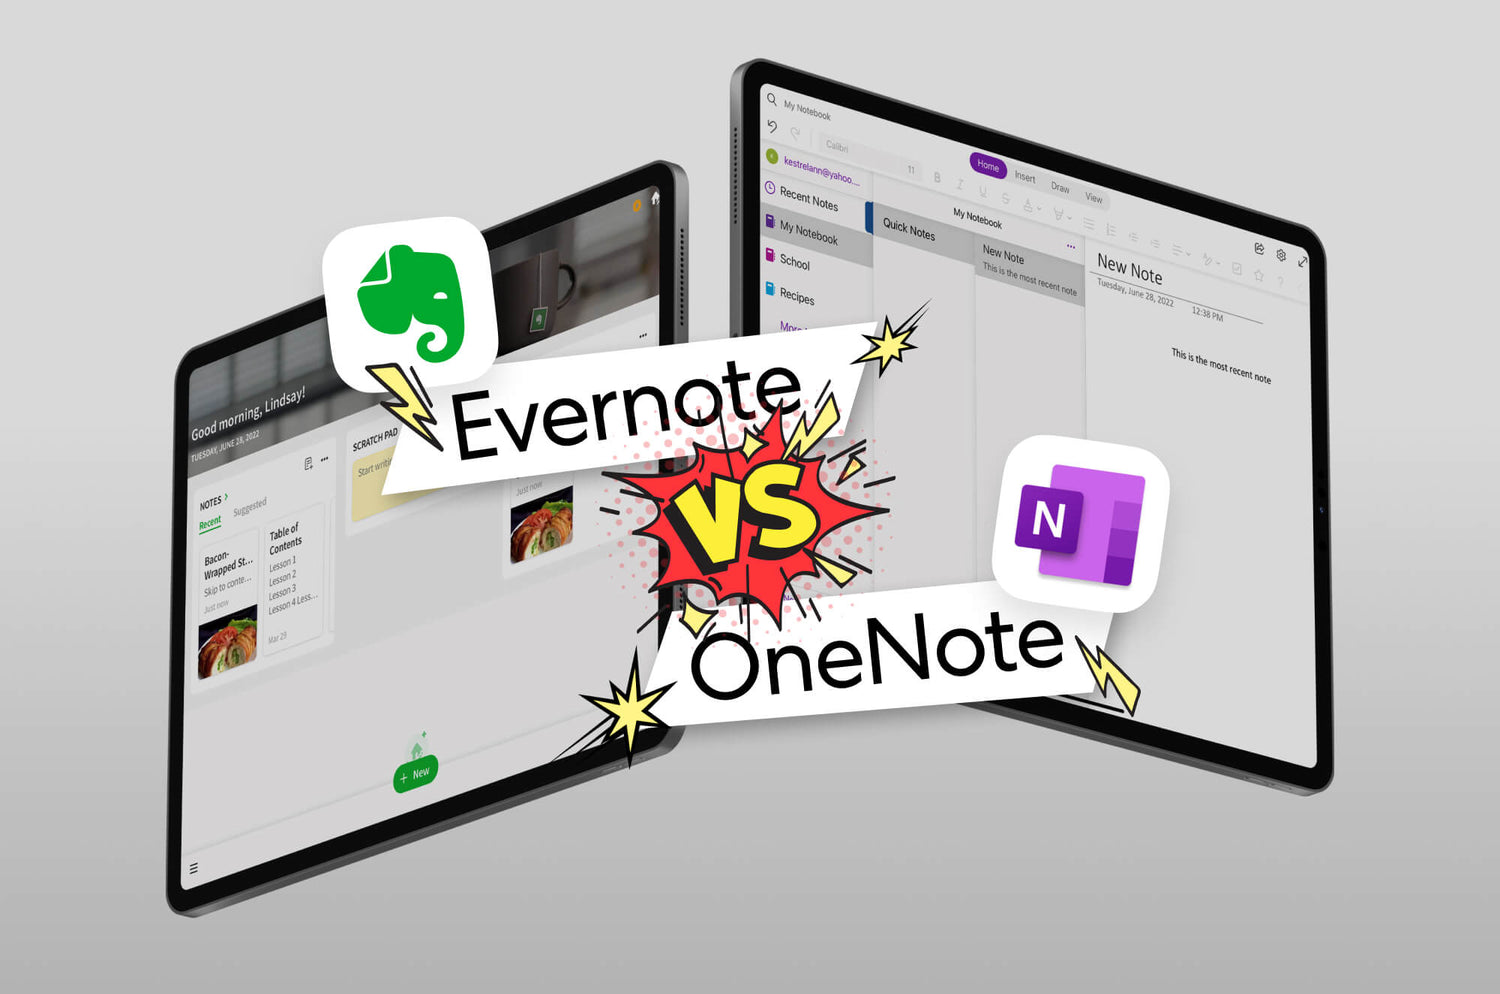 How to Blog Better with Evernote